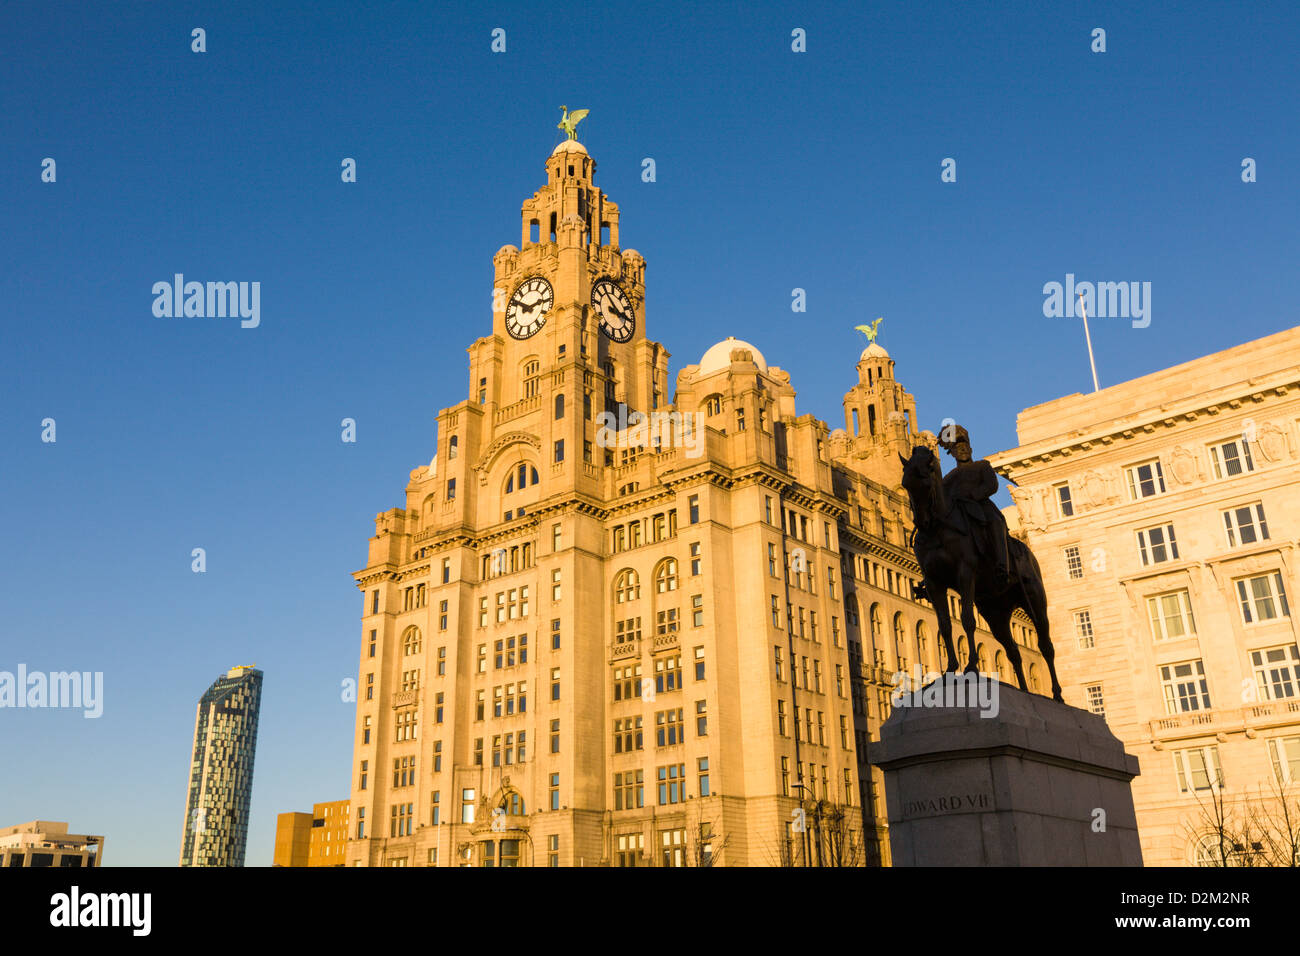 Liver Buildings and statue of Edward VII, Liverpool, England Stock Photo